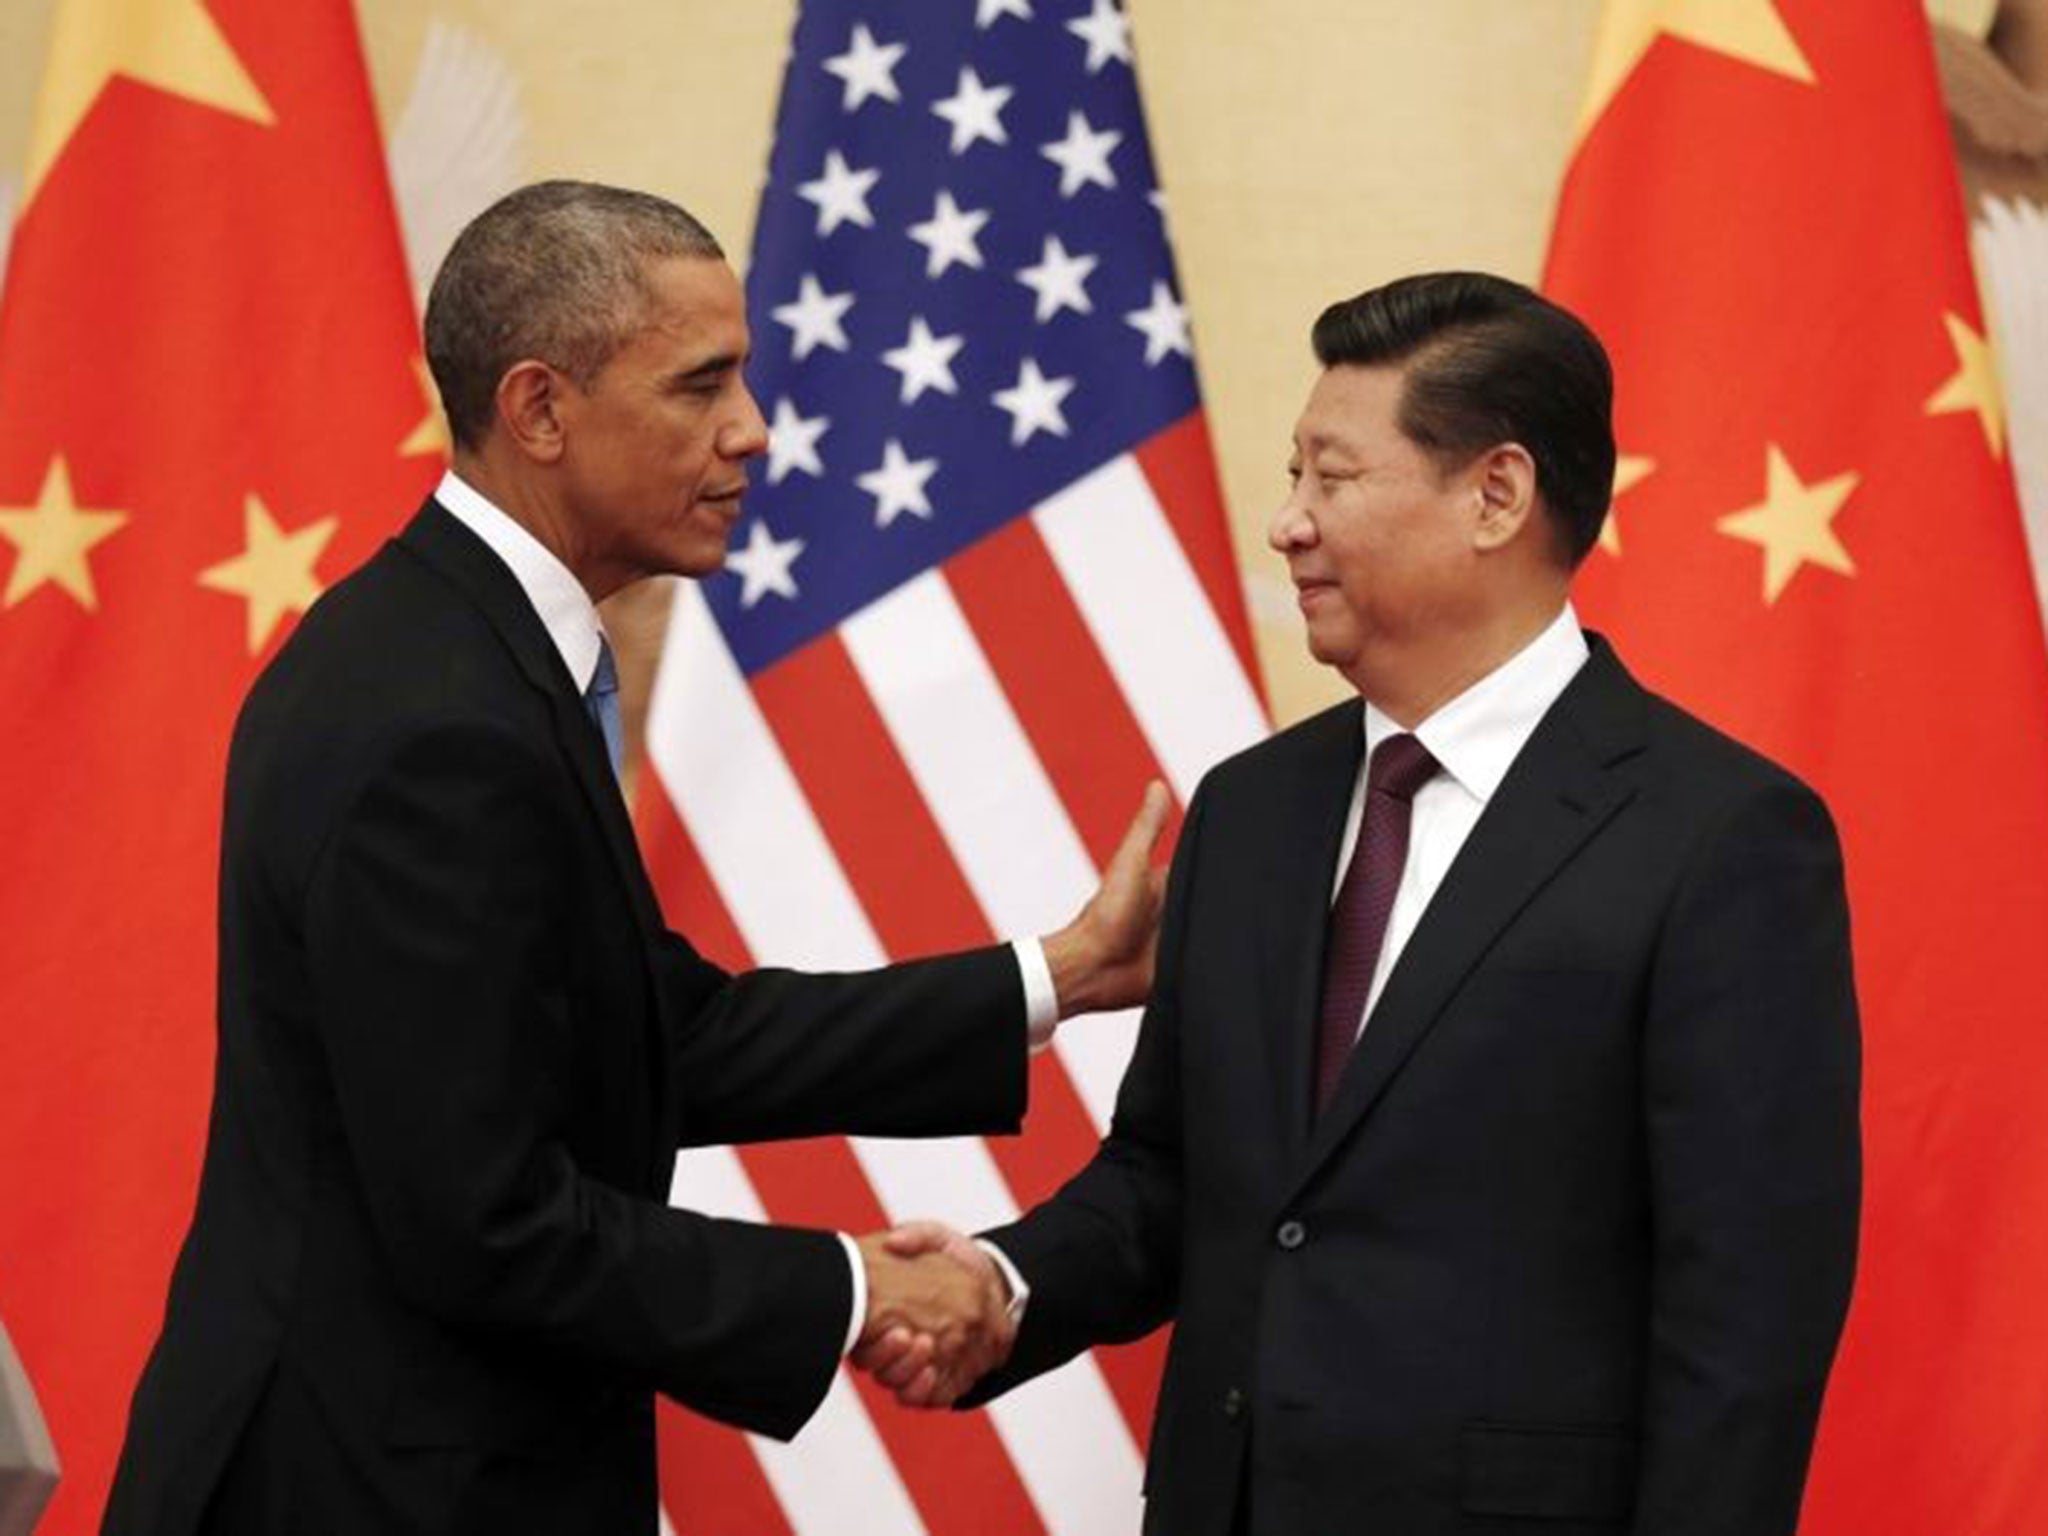 U.S. President Barack Obama (L) and Chinese President Xi Jinping shake hands at the end of their news conference in the Great Hall of the People in Beijing November 12, 2014.